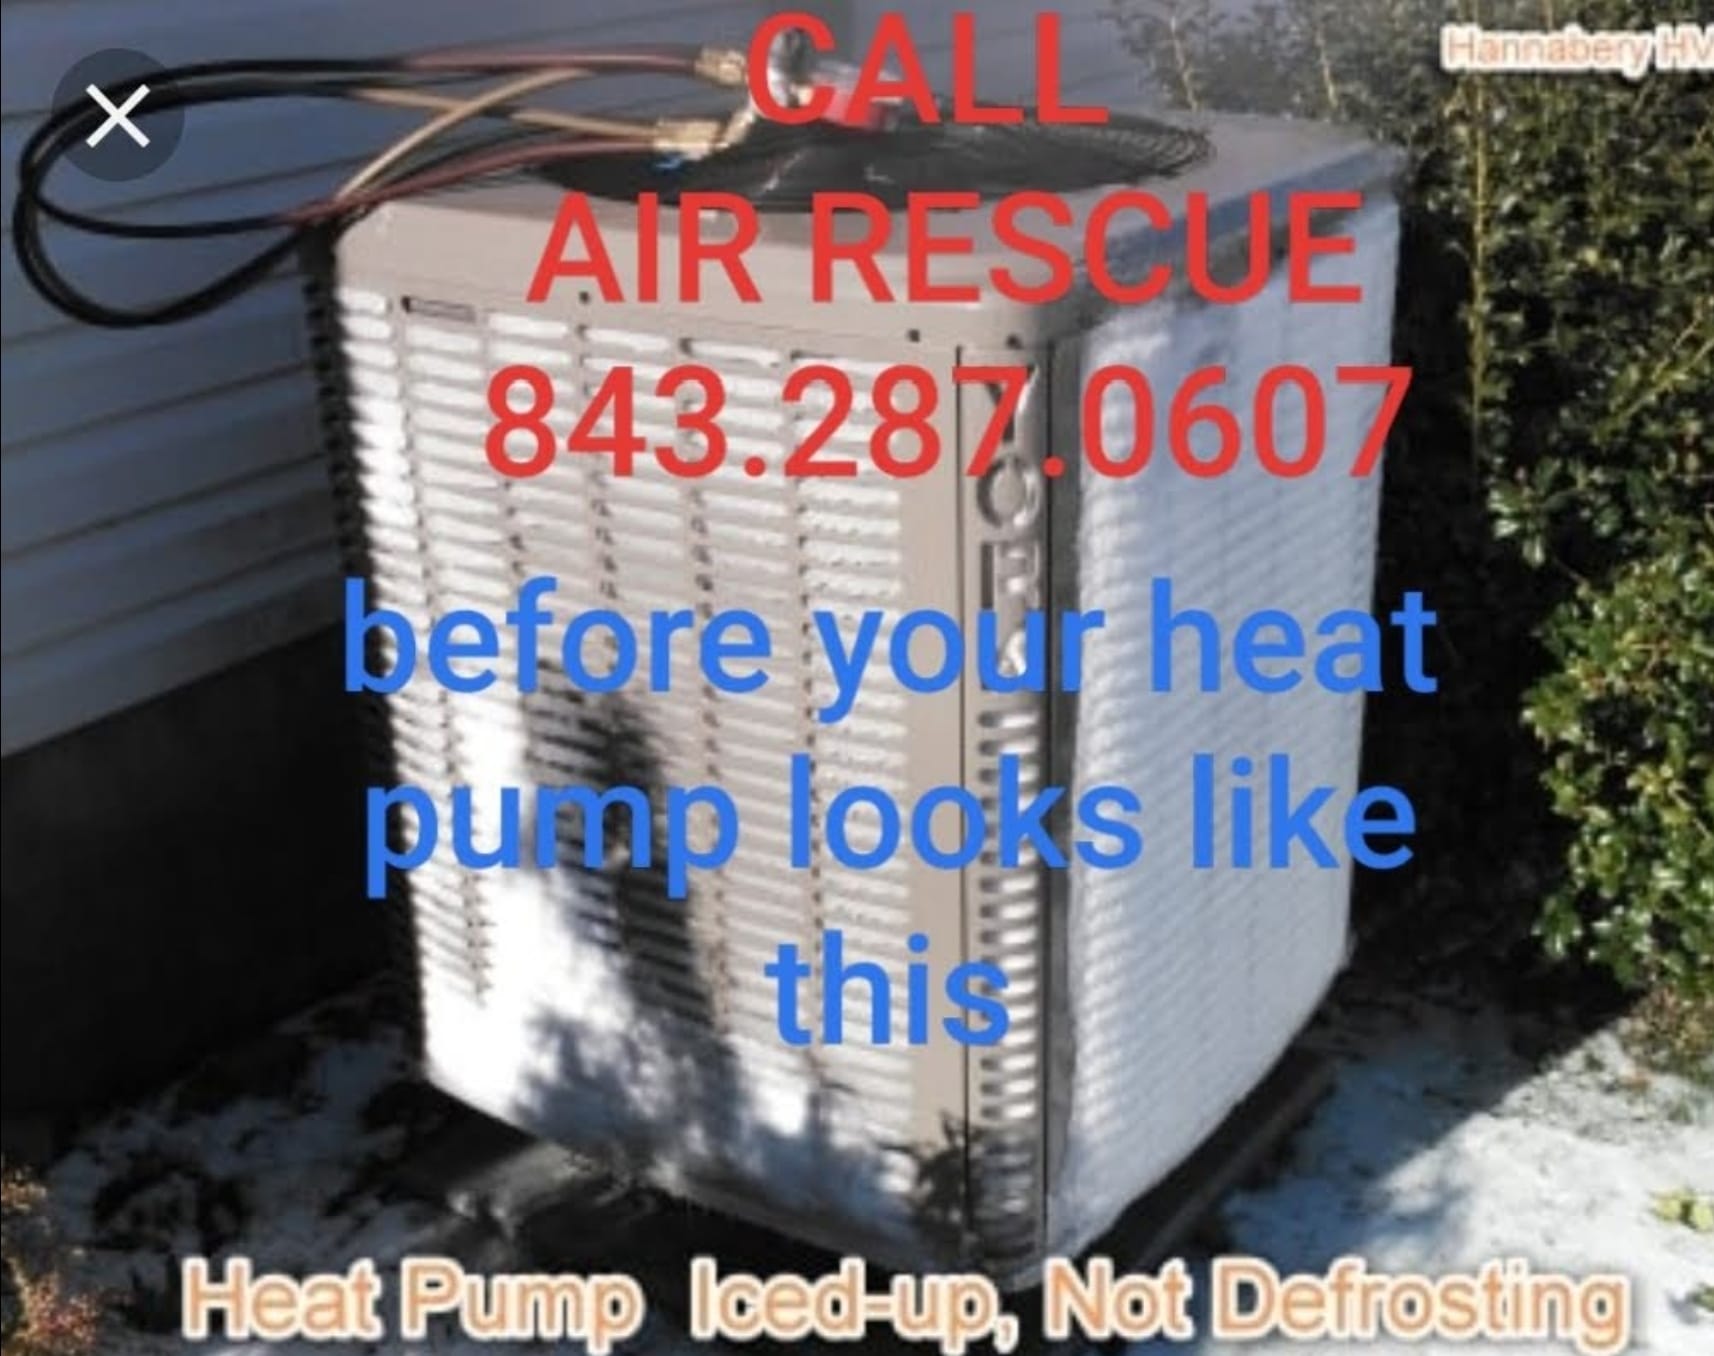 Air Rescue Heating Air Conditioning & Plumbing Services 222 Legrand, Cheraw South Carolina 29520